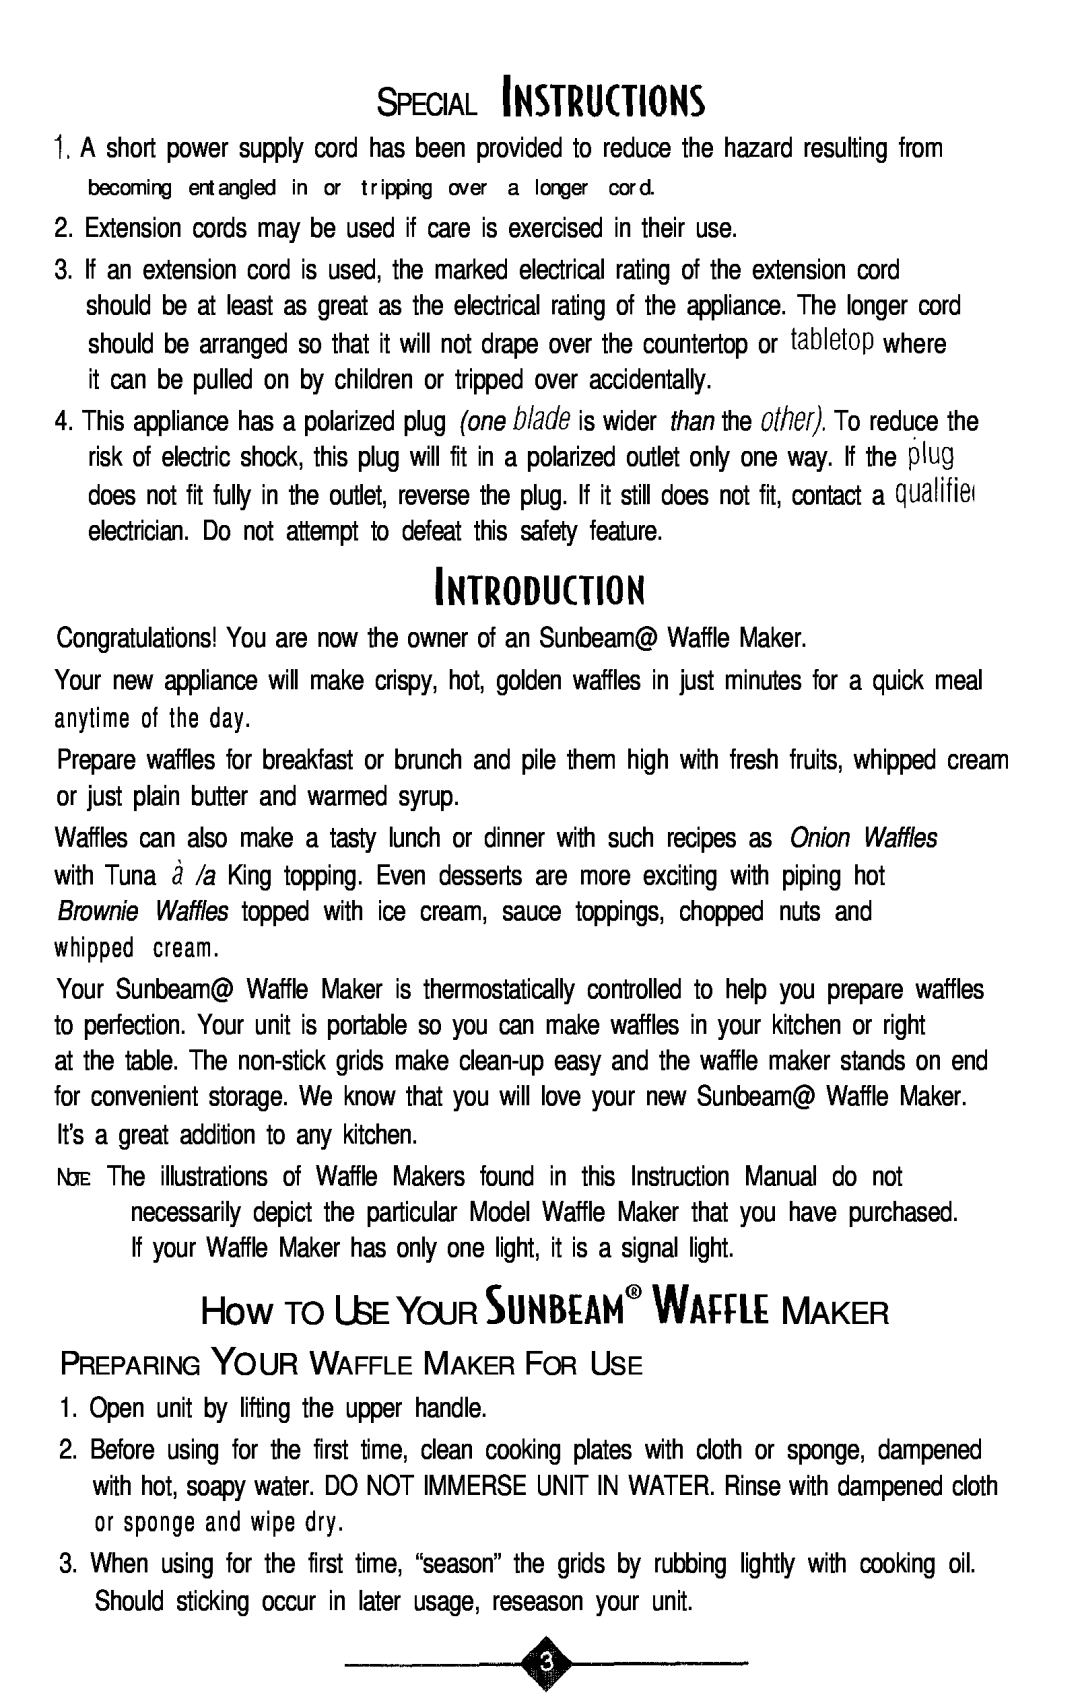 Sunbeam 3856-1 instruction manual Special Instructions, Introduction, How TO USE YOUR SUNBEAM@ WAffLE MAKER 